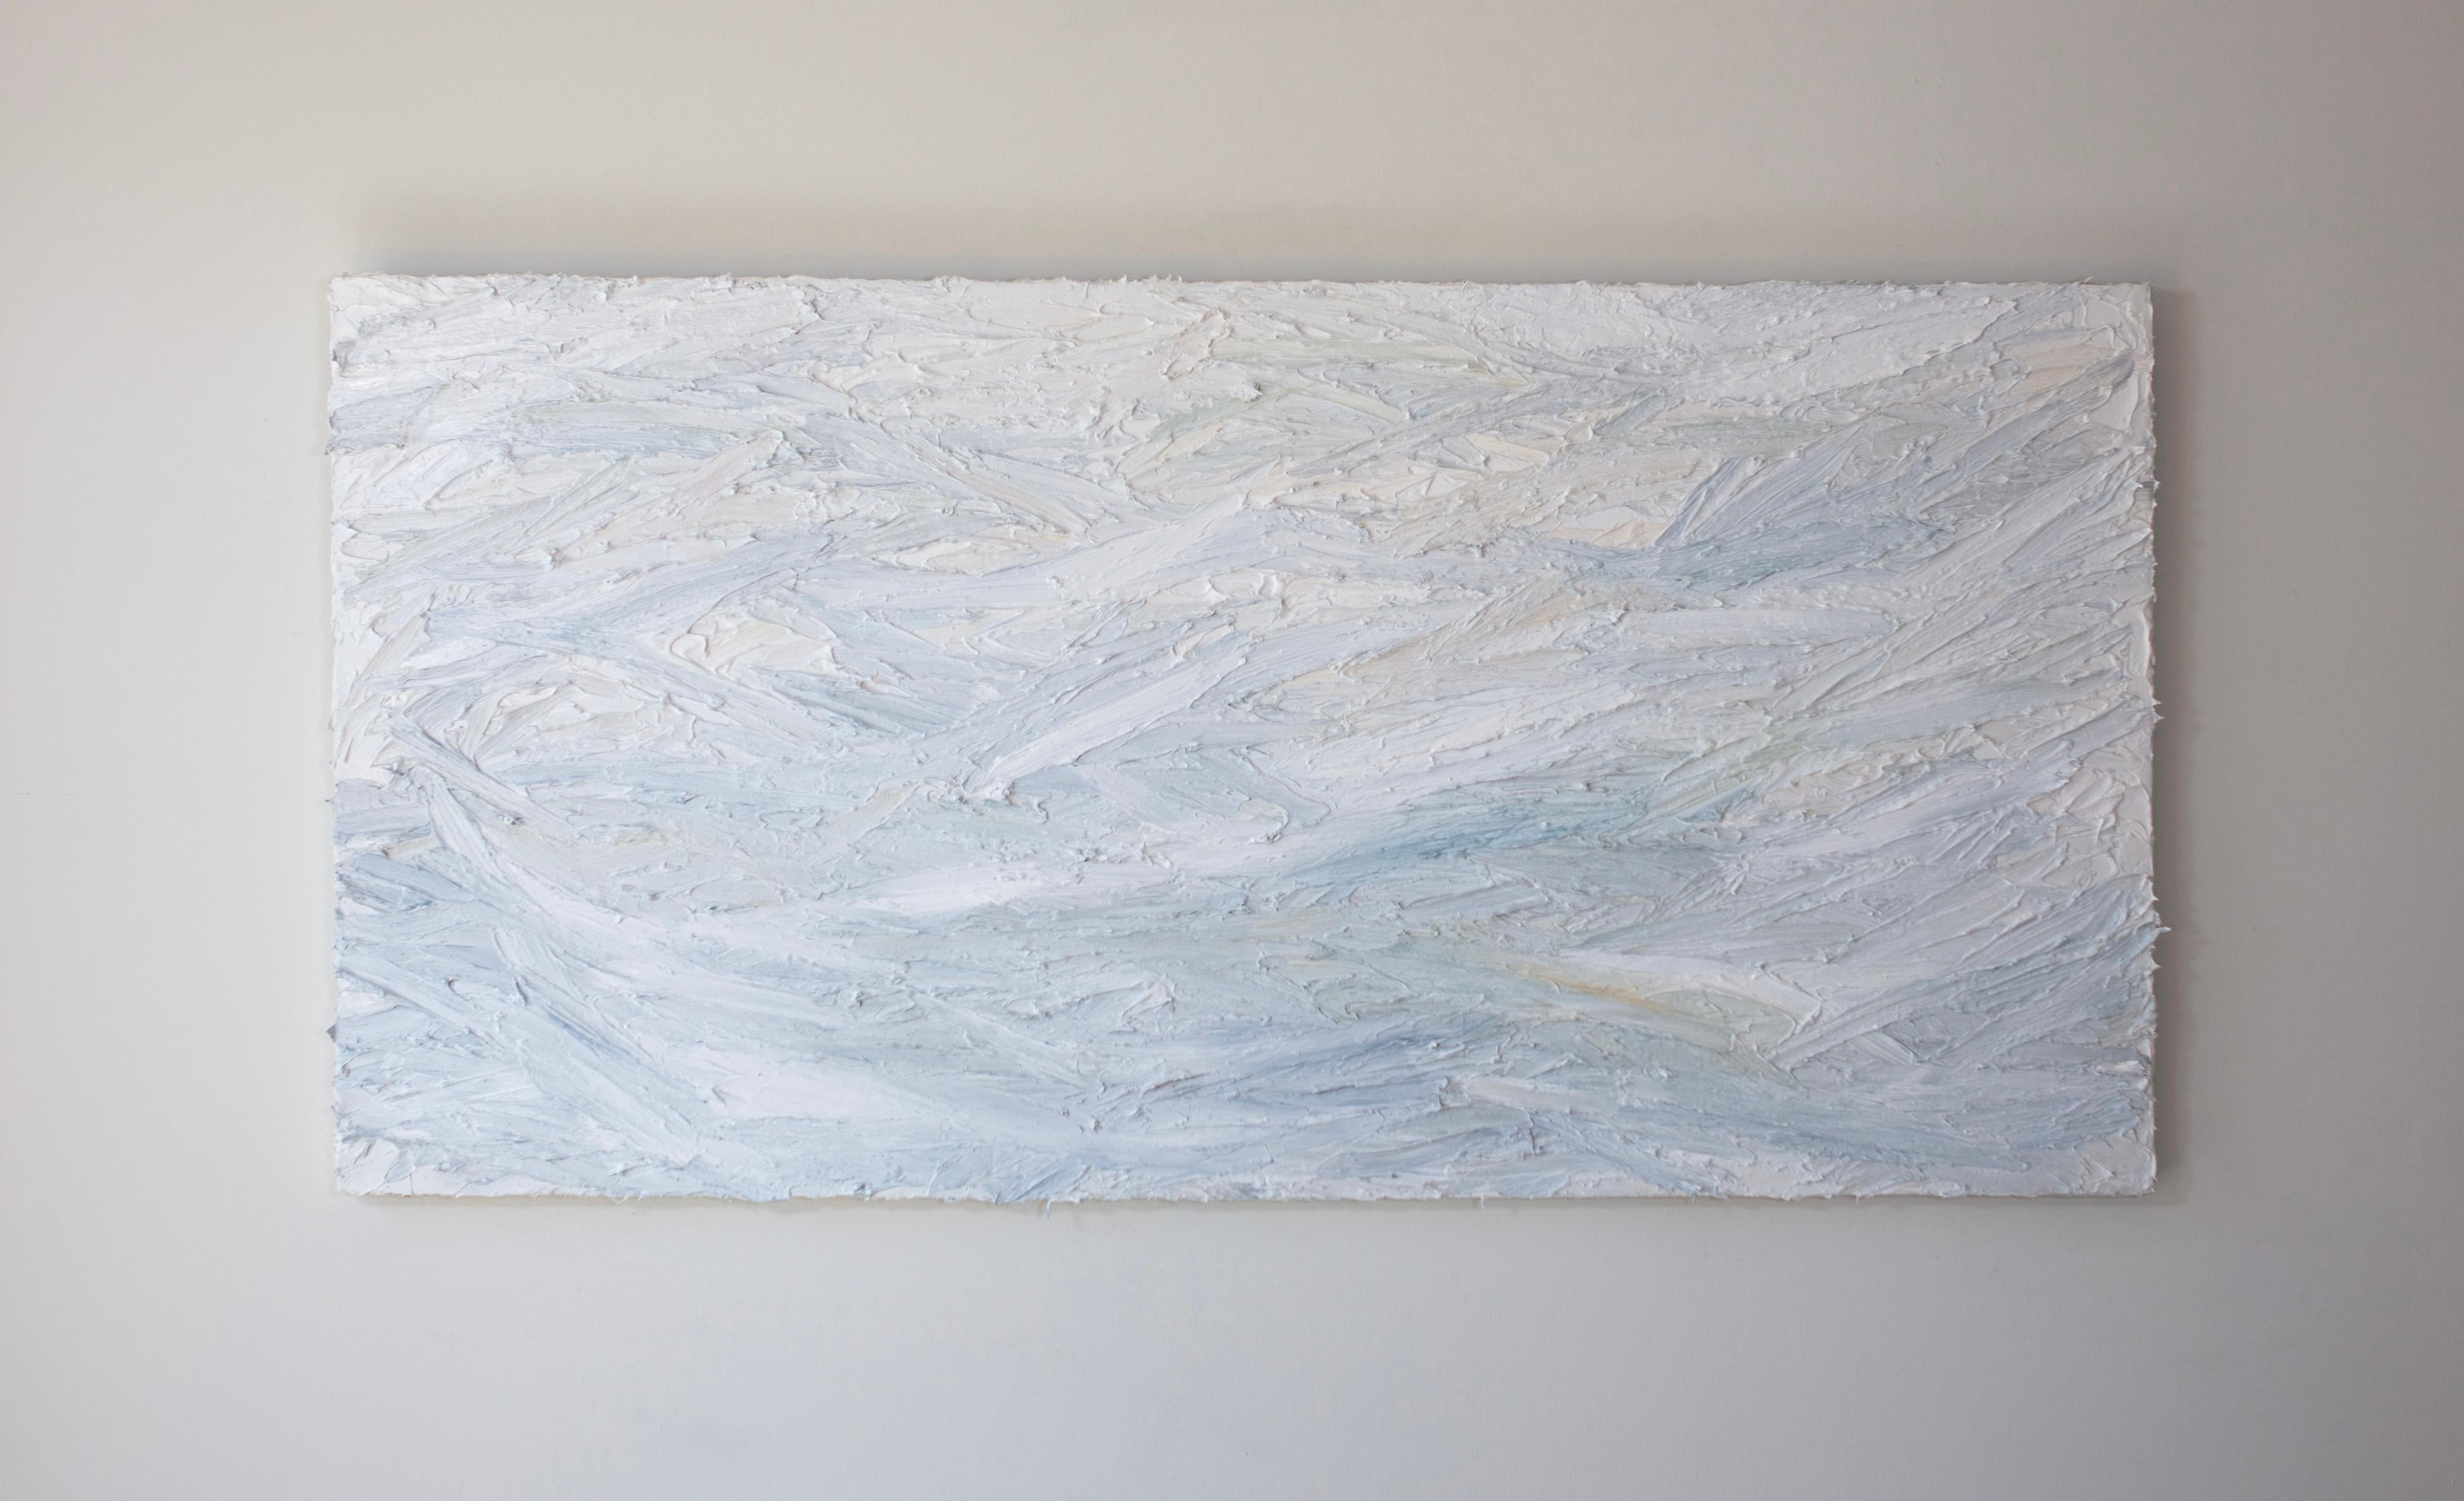 Abstract Painting Teodora Guererra - "Peinture abstraite "#Frosted